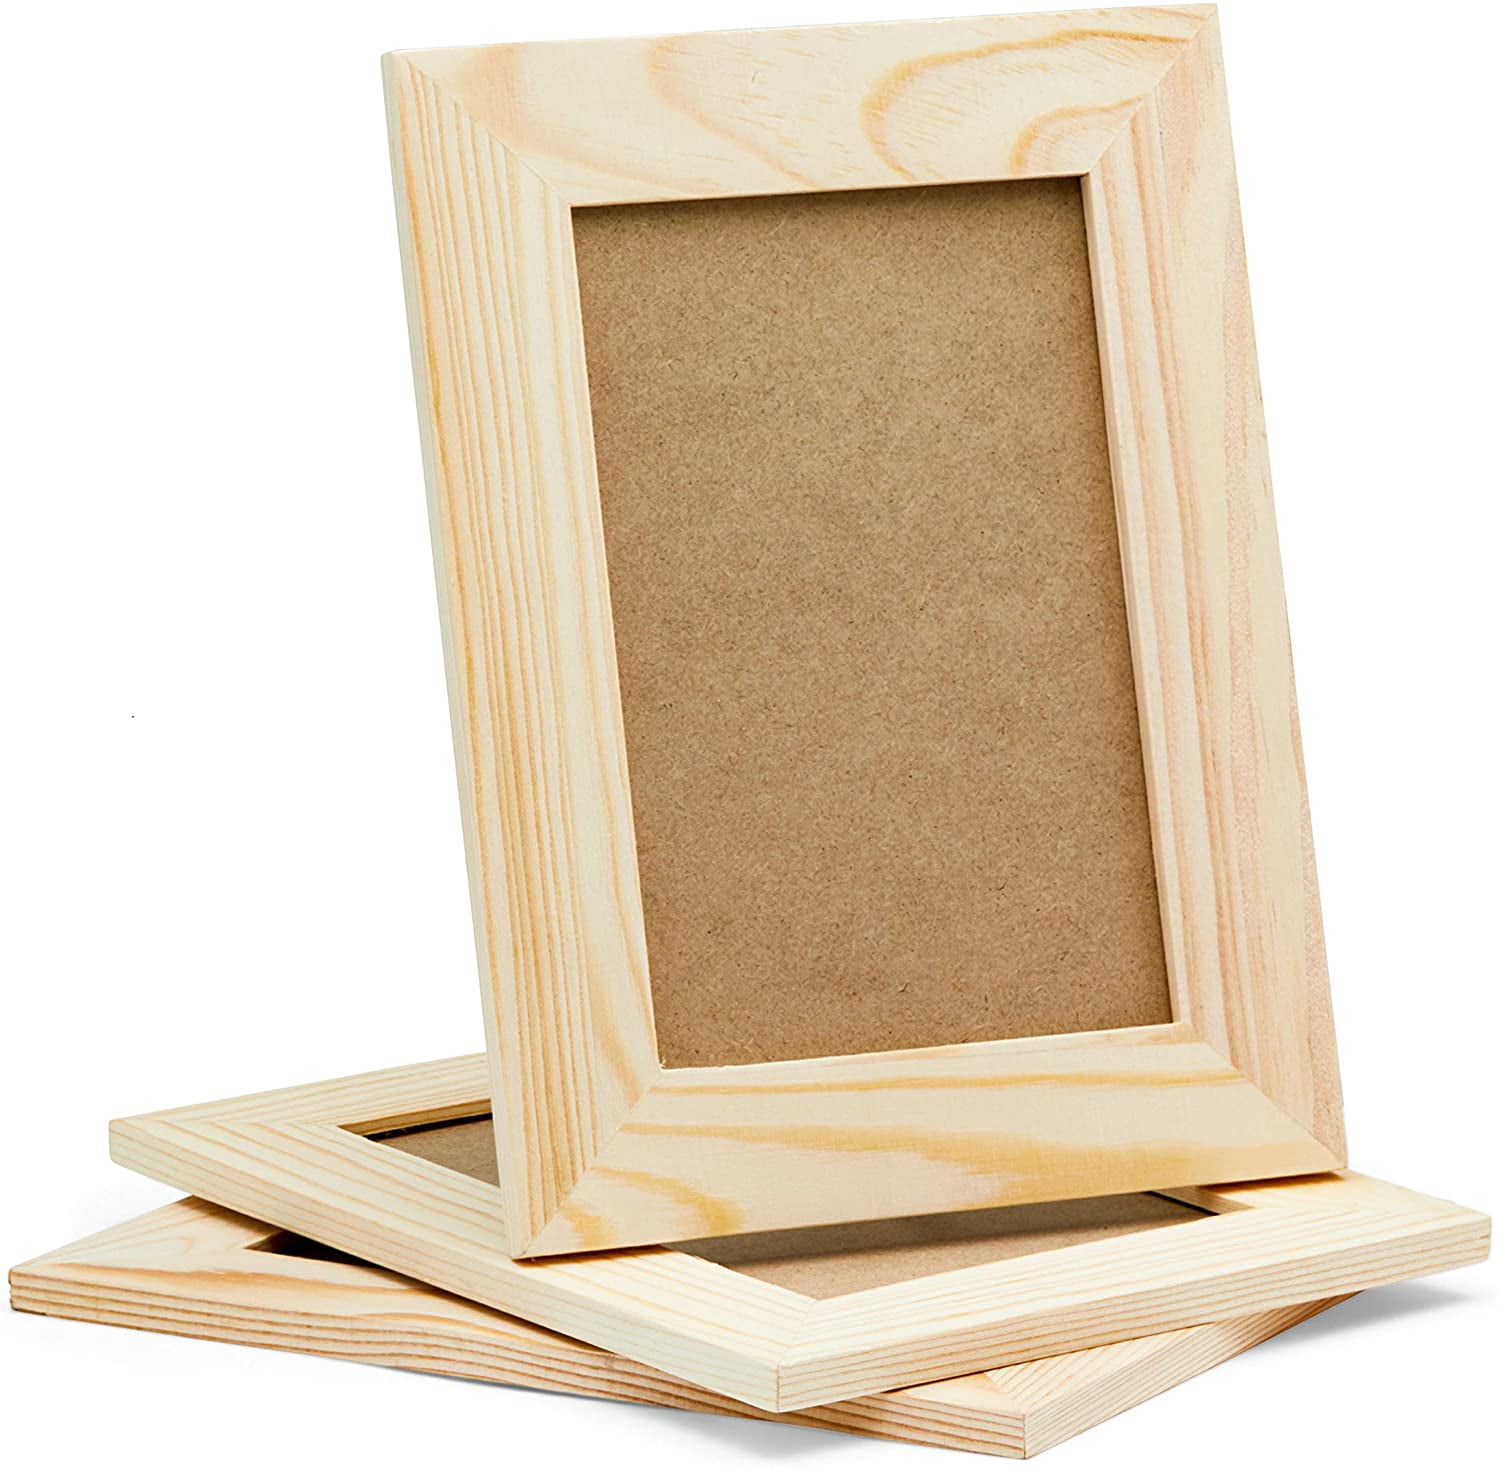 Pack of 12 - Unfinished Solid Pine Wood Picture Frames for Arts & Crafts, DIY Painting Projects - Stand or Hang on The Wall - (6x8 Frame Size Holds